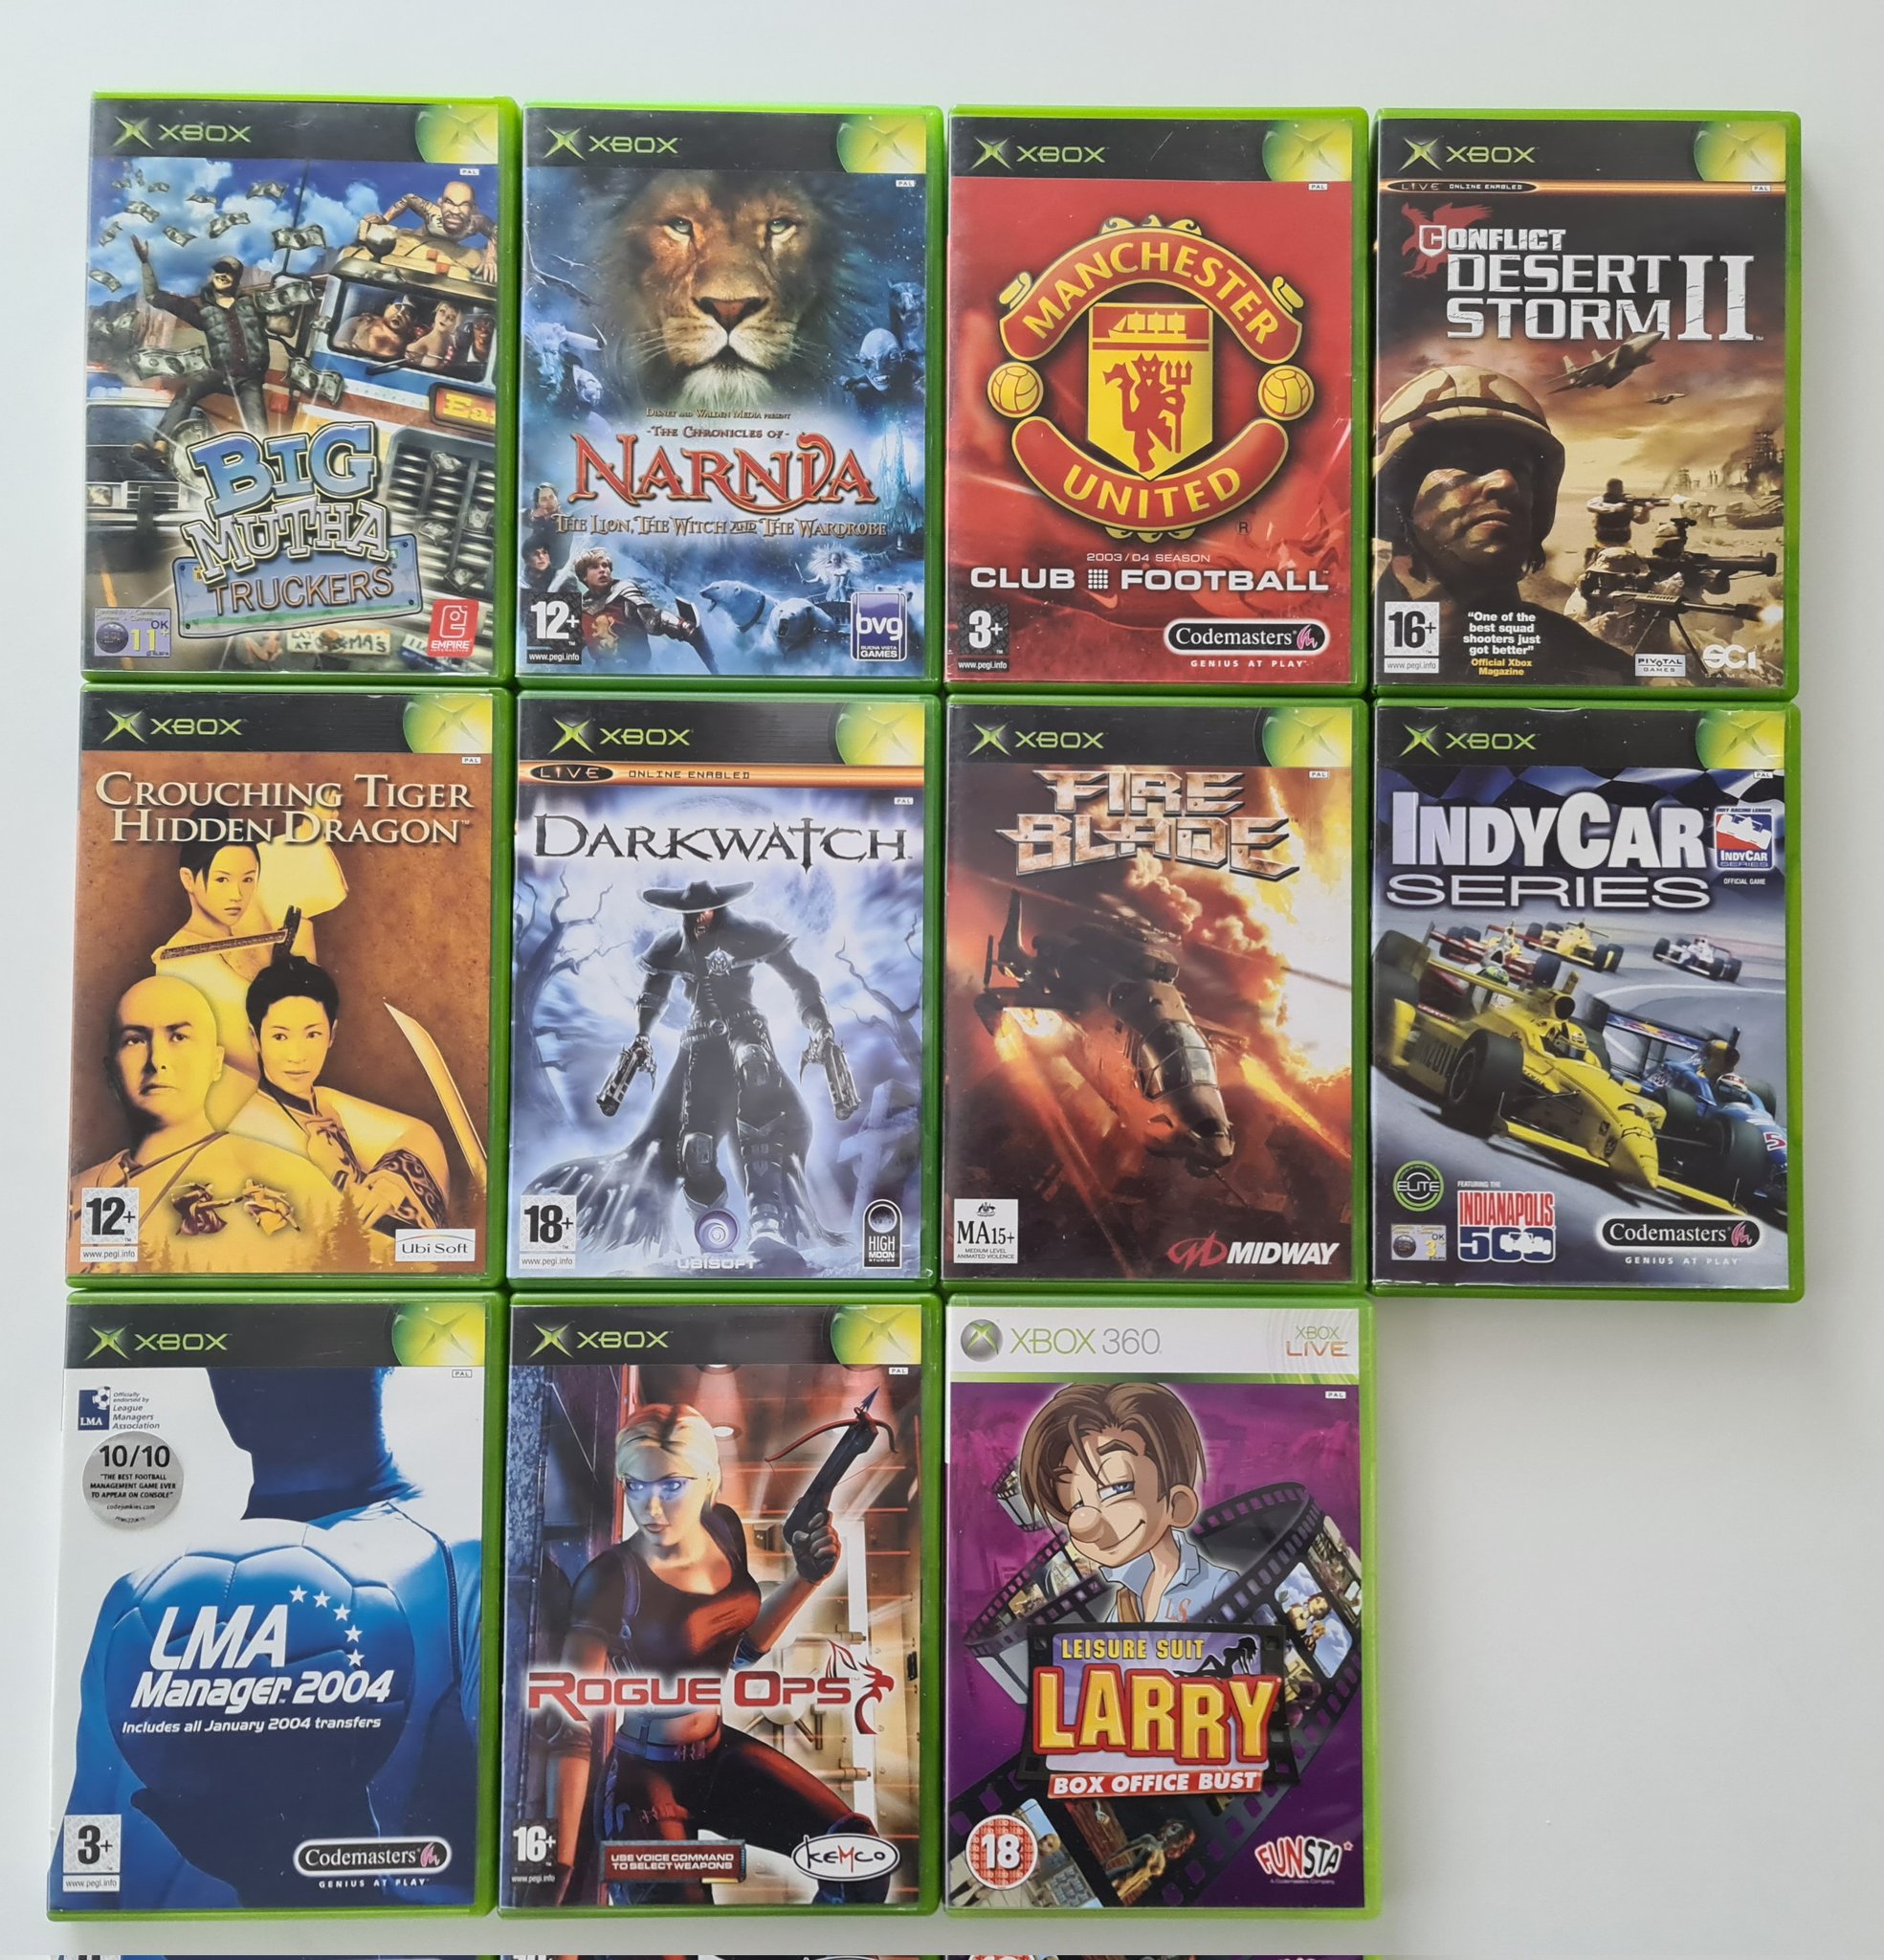 Ville Wikström 🇫🇮 on X: "Again, some #OriginalXbox games and one odd # xbox360 surprise in there. I hear Darkwatch is a hidden gem. Now I have to  take a break in growing